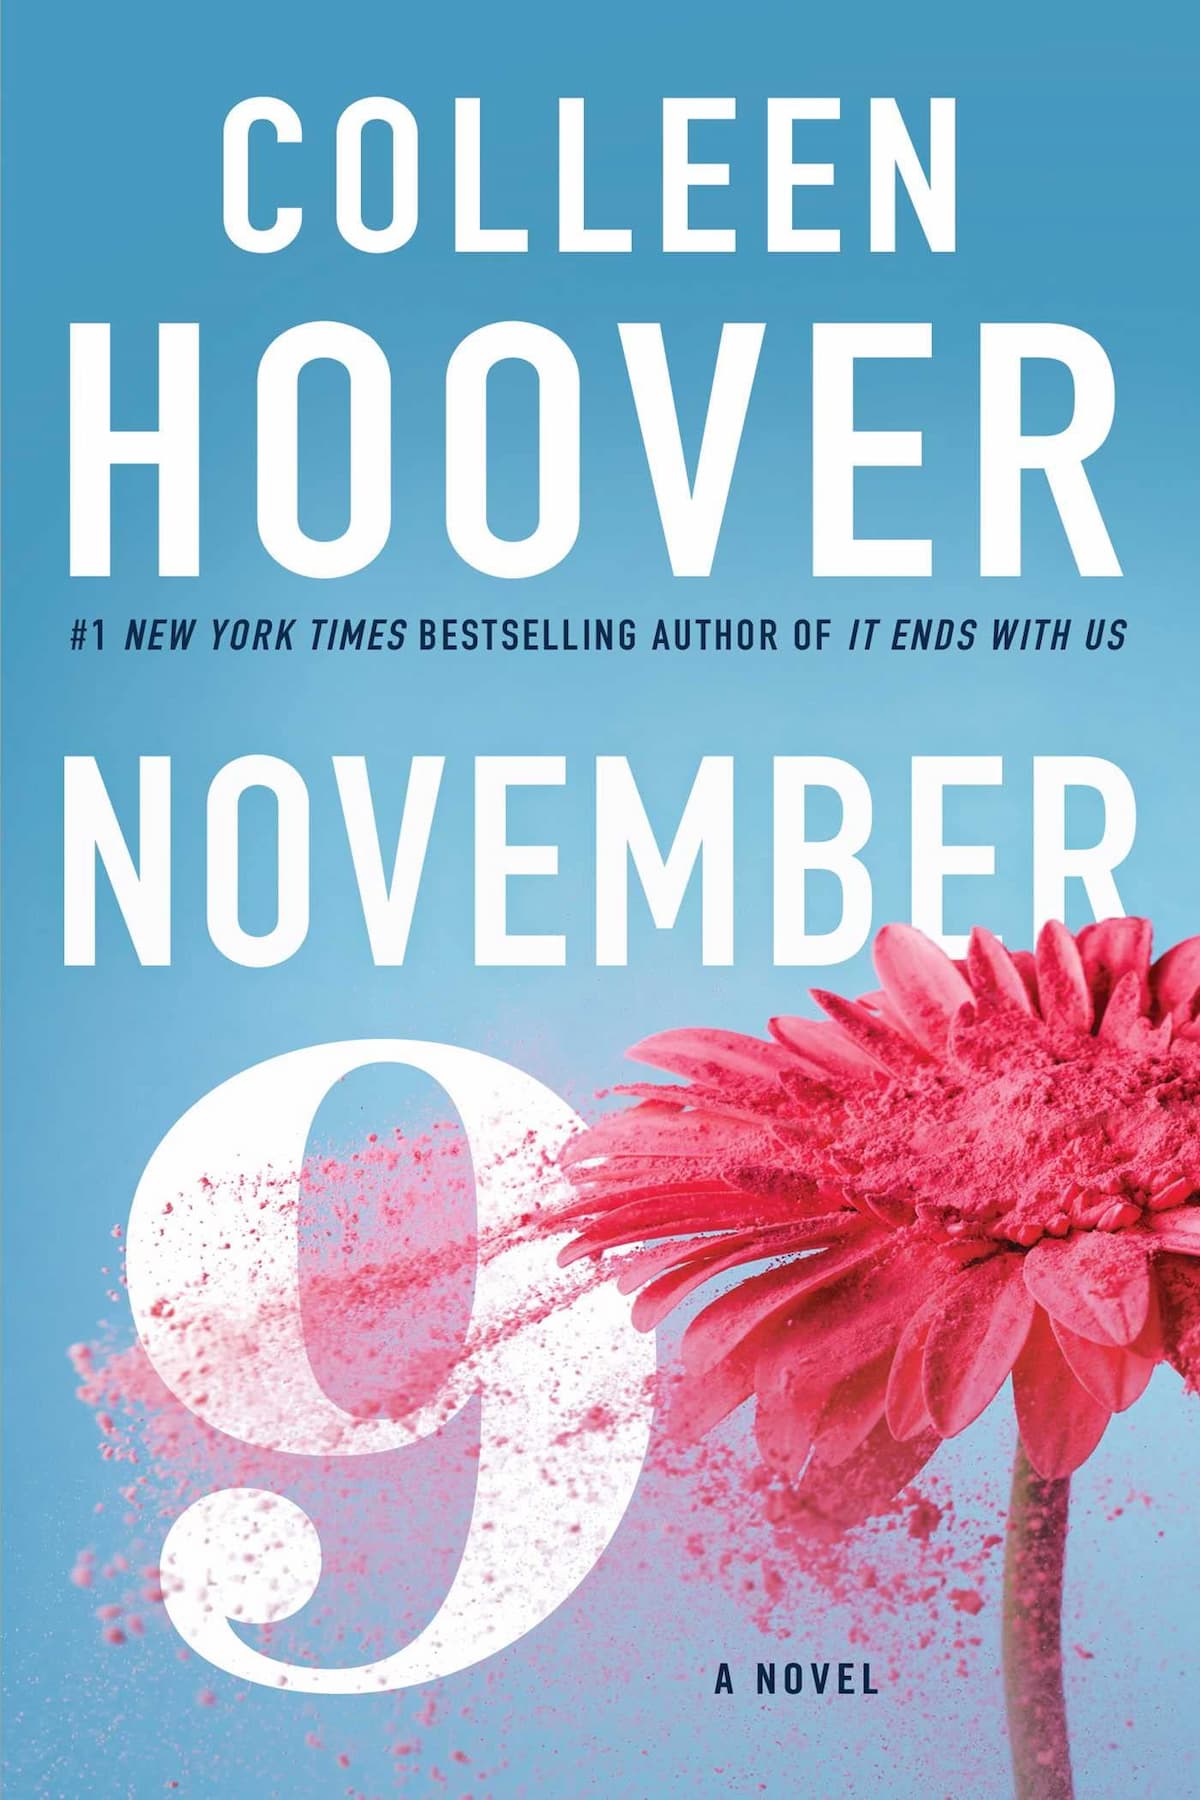 Colleen Hoover Books In Order, Contemporary Romance, Fiction, New Adult Romance, Romance, Women's Fiction, November 9 – Colleen Hoover